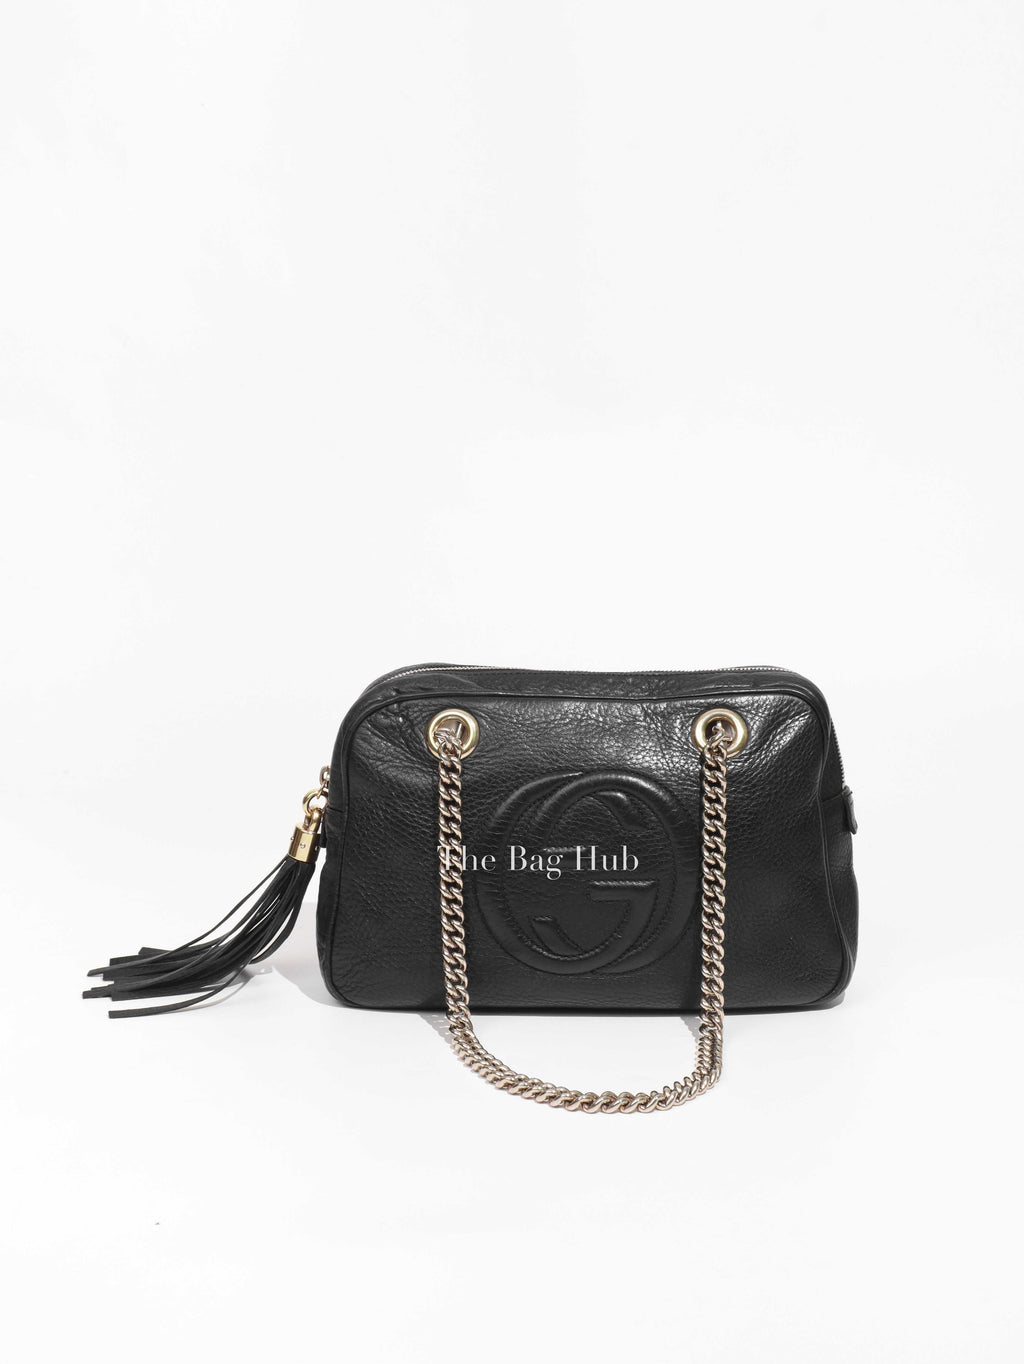 Gucci Black Pebbled Leather Soho Chain Small Shoulder Bag